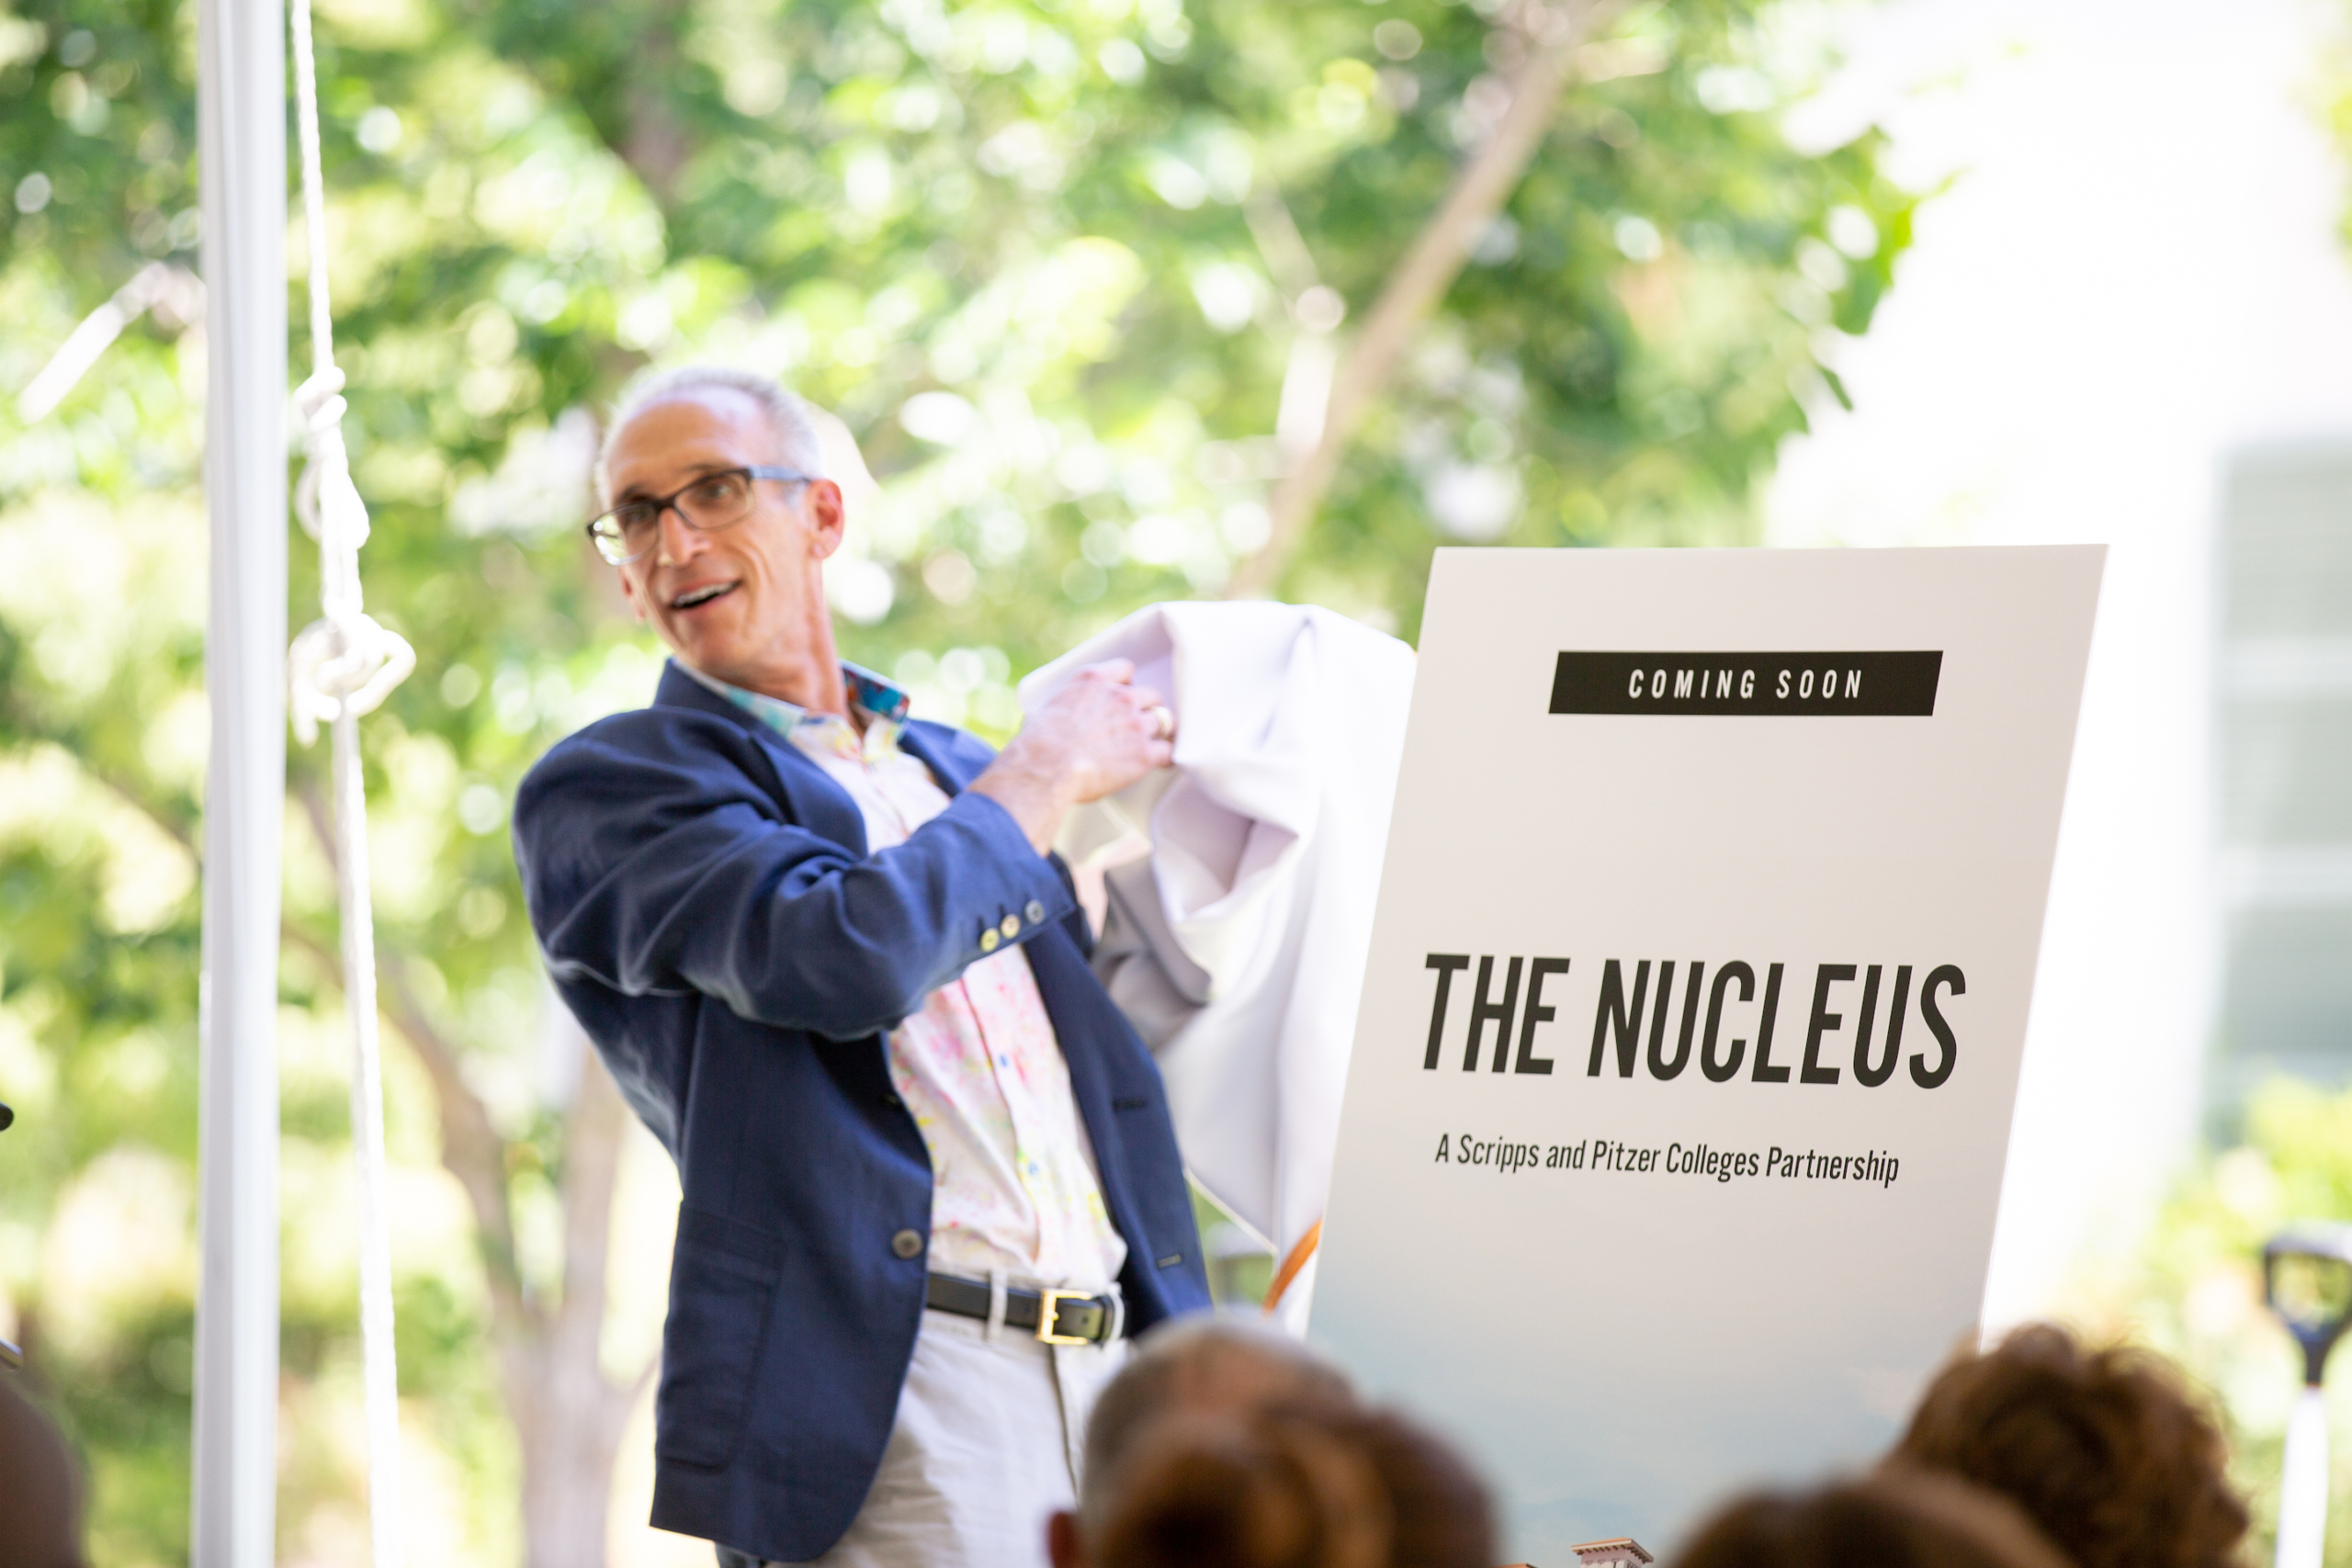 Scripps and Pitzer Colleges Break Ground on New Science Center, The Nucleus